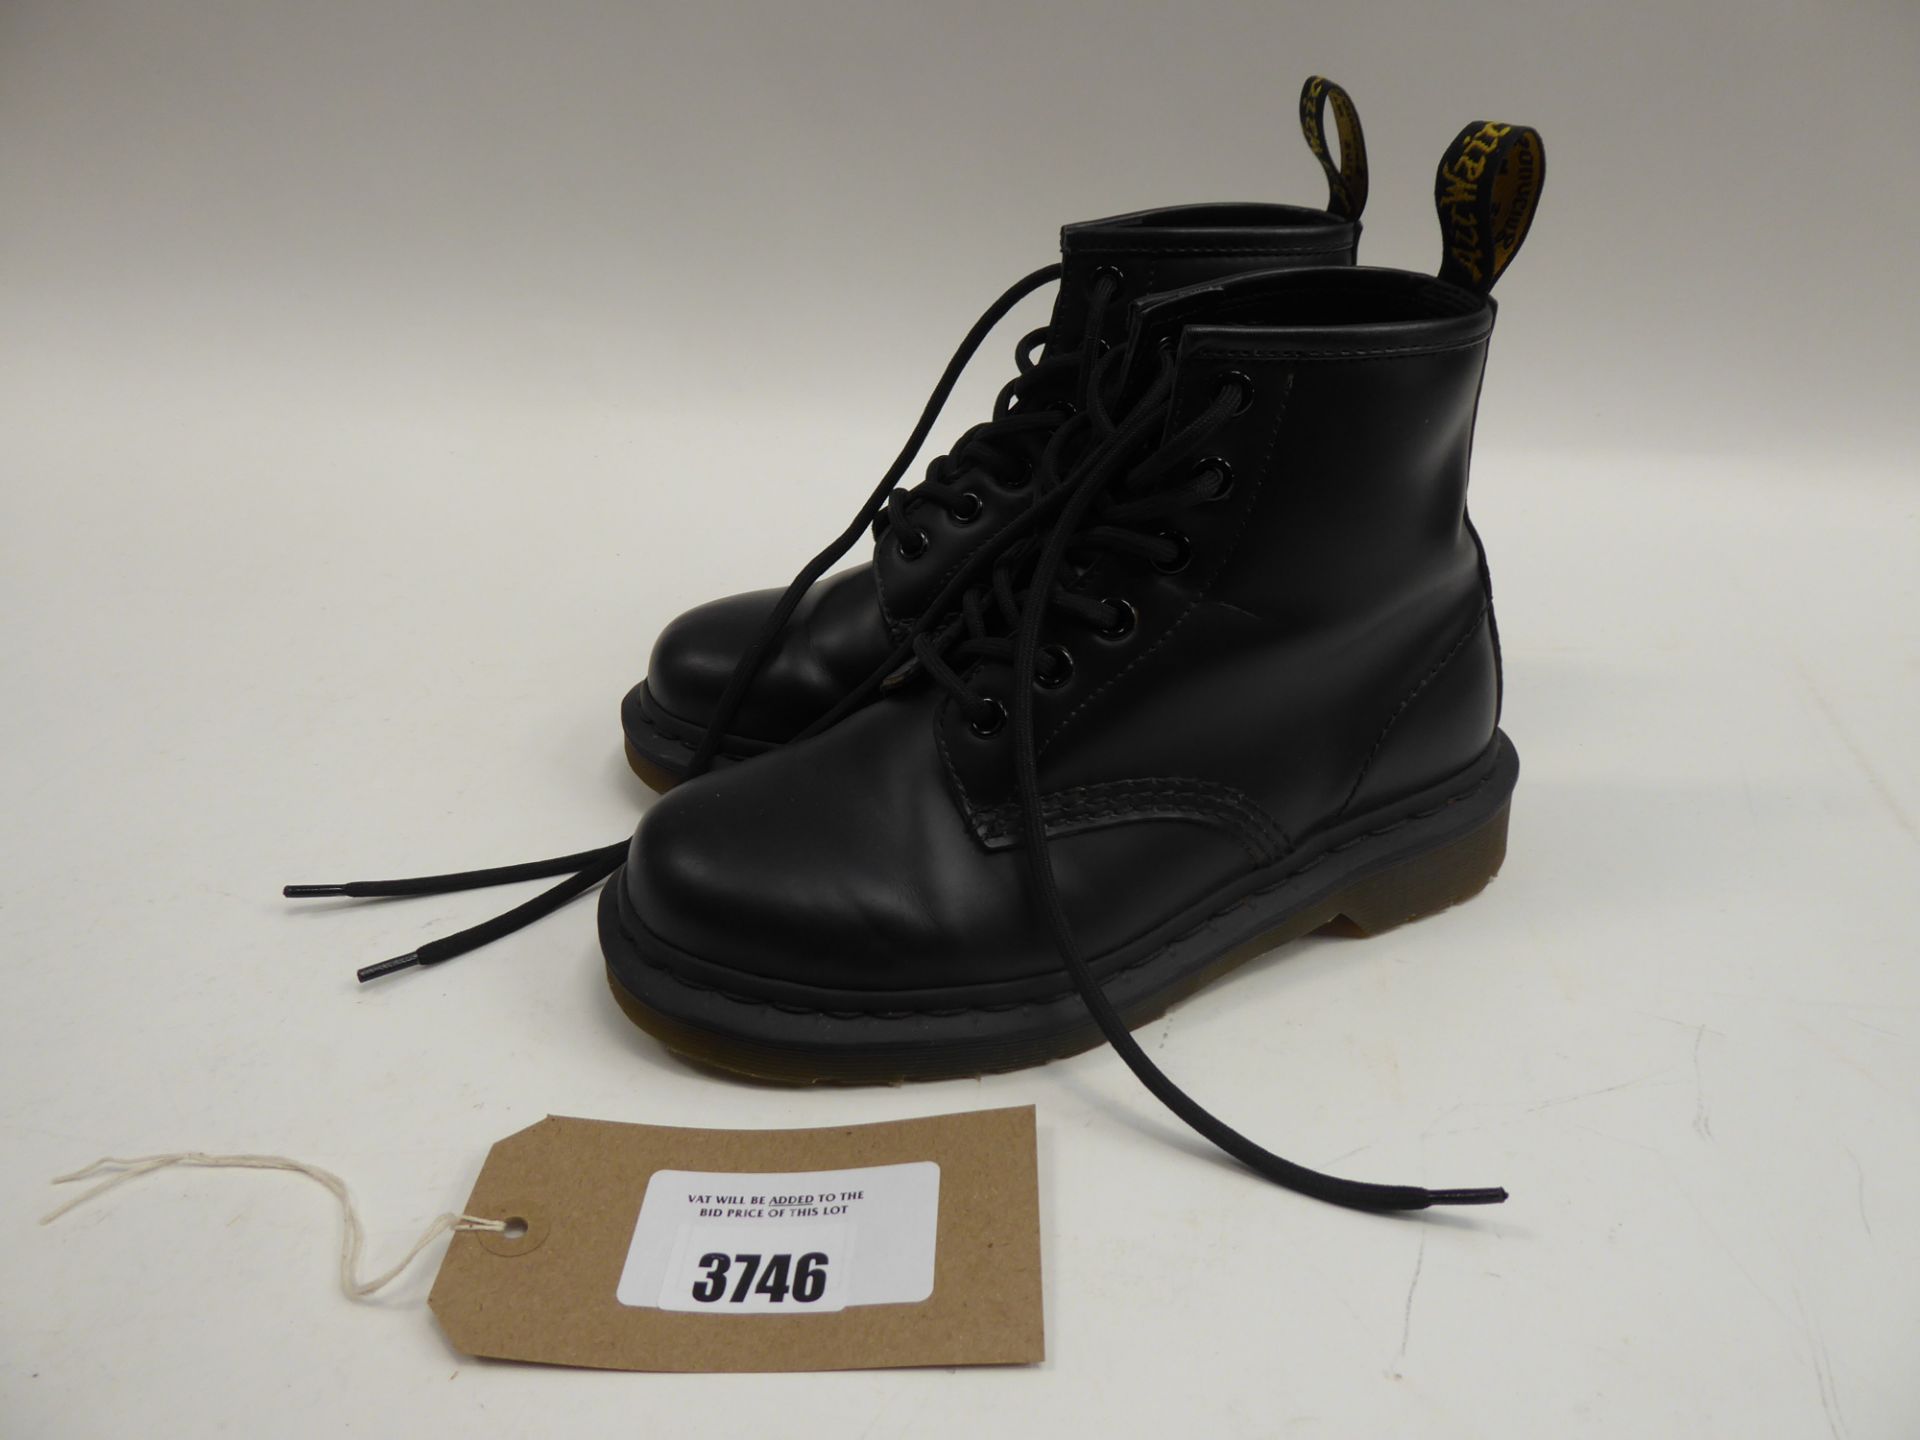 Dr Martens AirWair ankle boots size 3